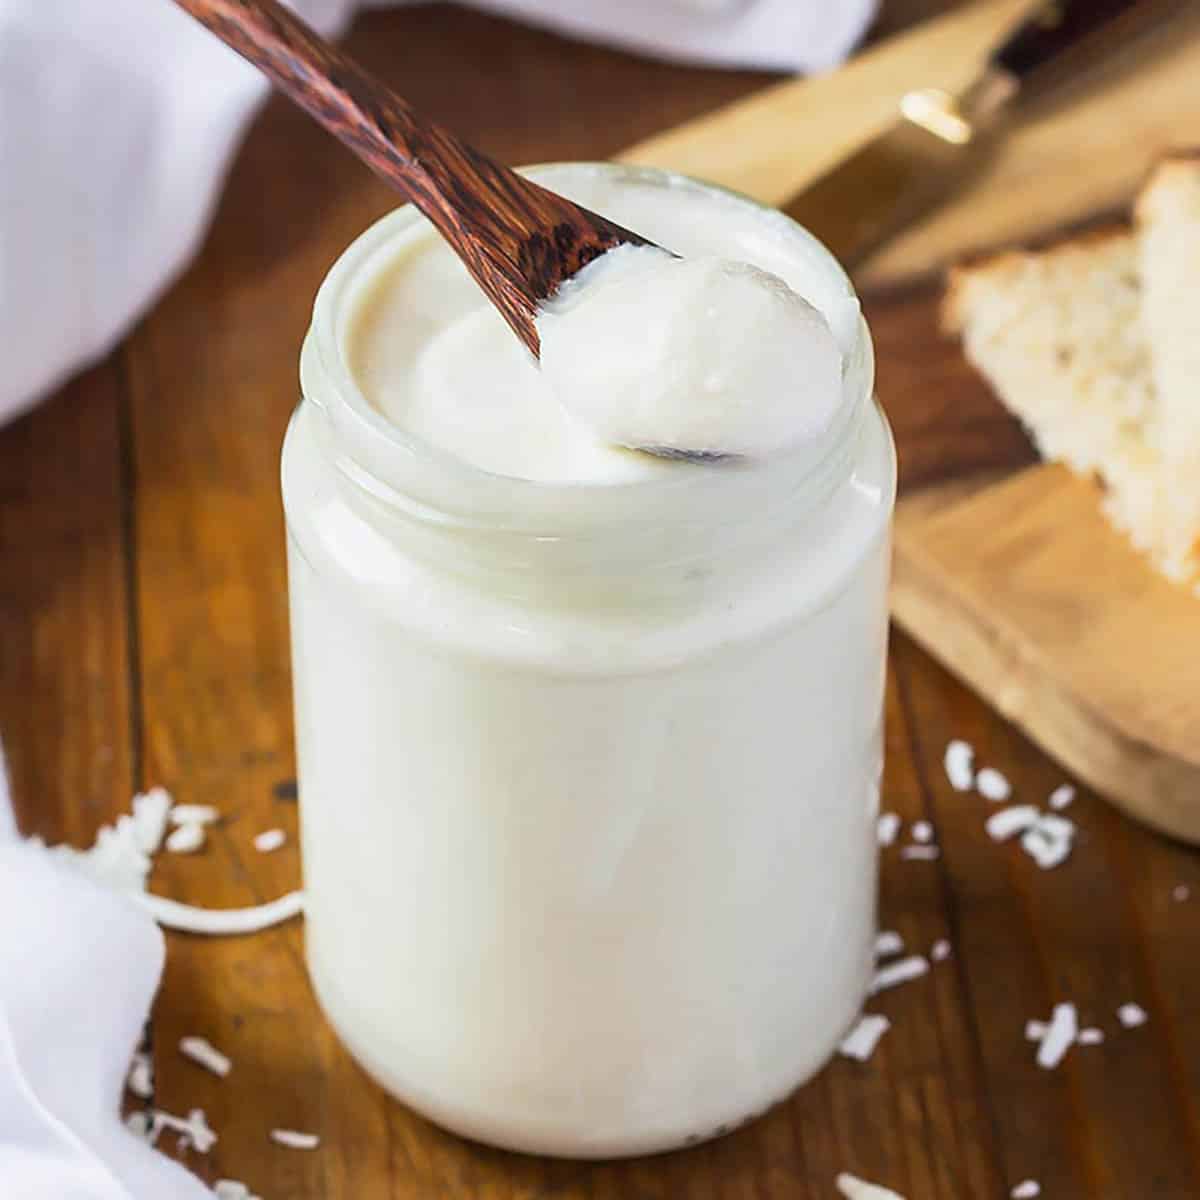 How To Make Coconut Butter - The BETTER Way!